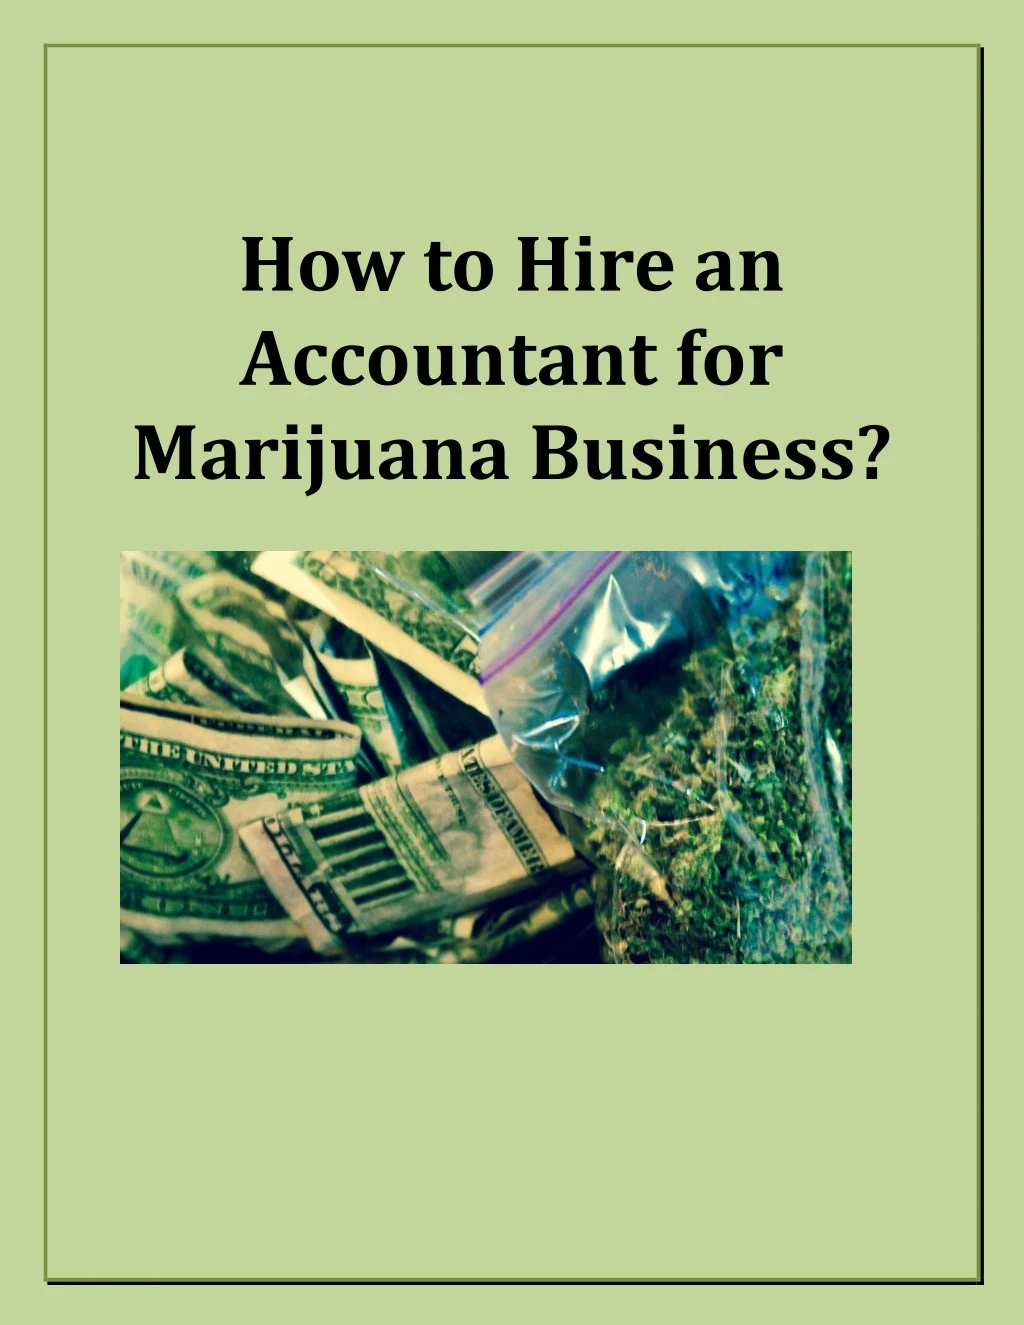 how to hire an accountant for marijuana business